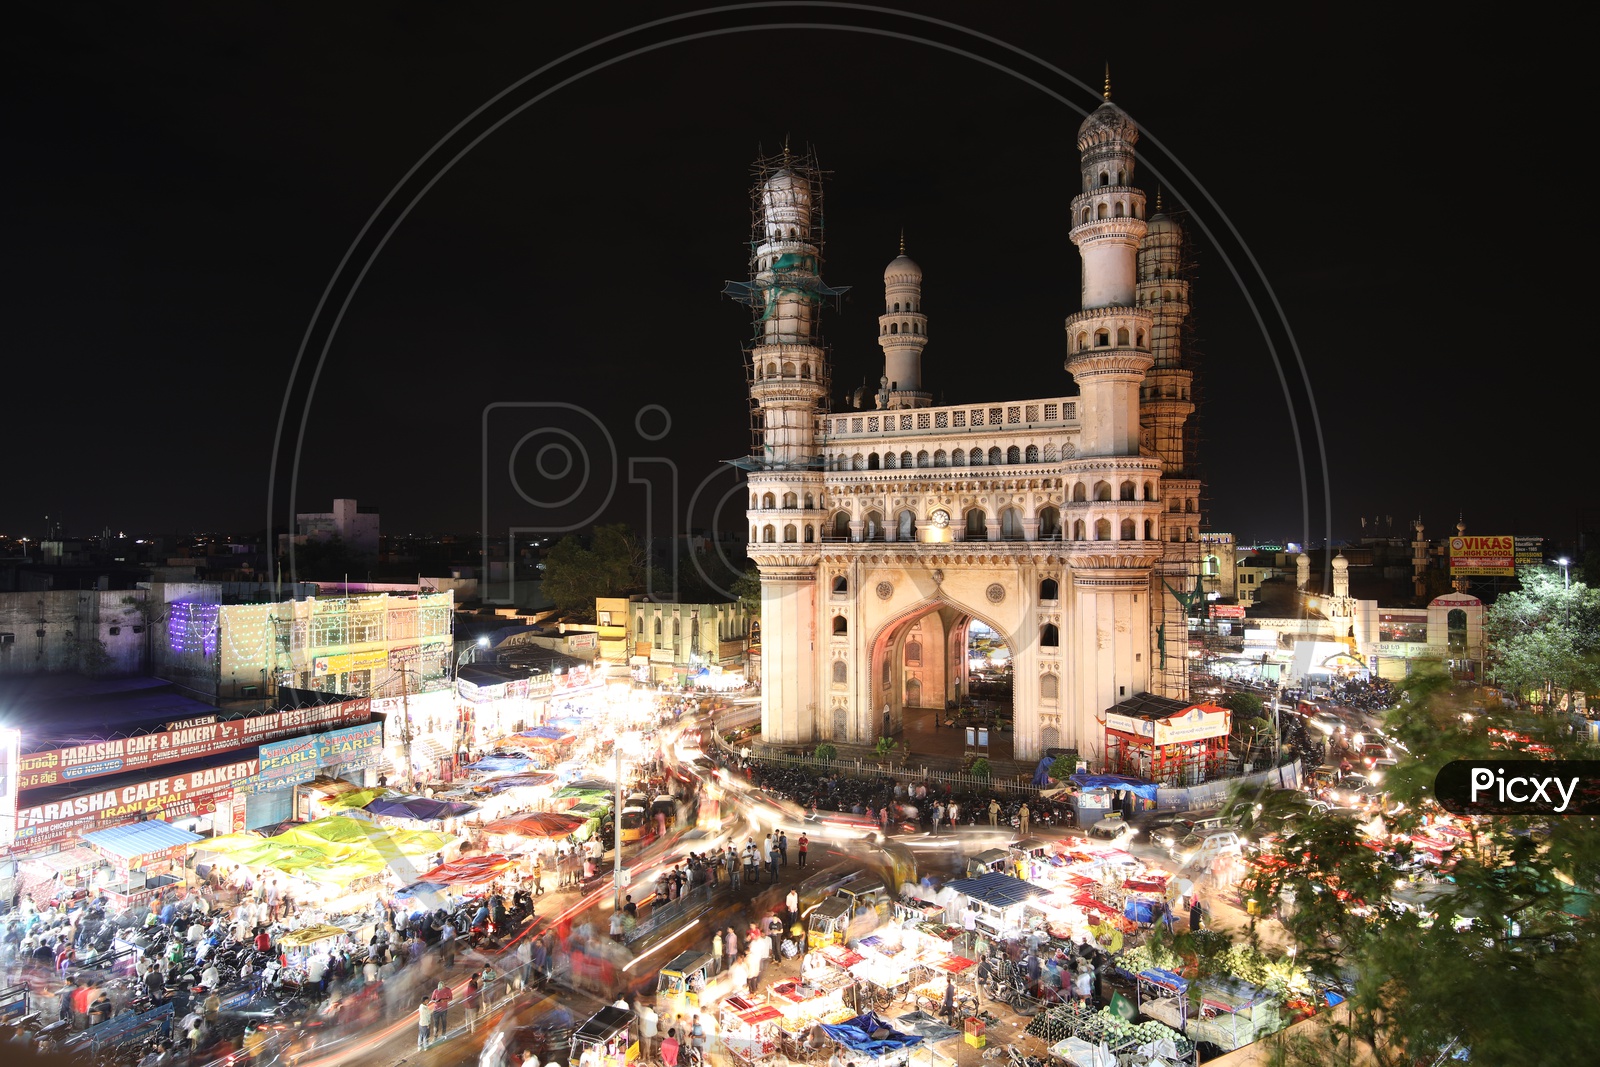 Traffic on the streets near Charminar/Indian Monument - Long exposure